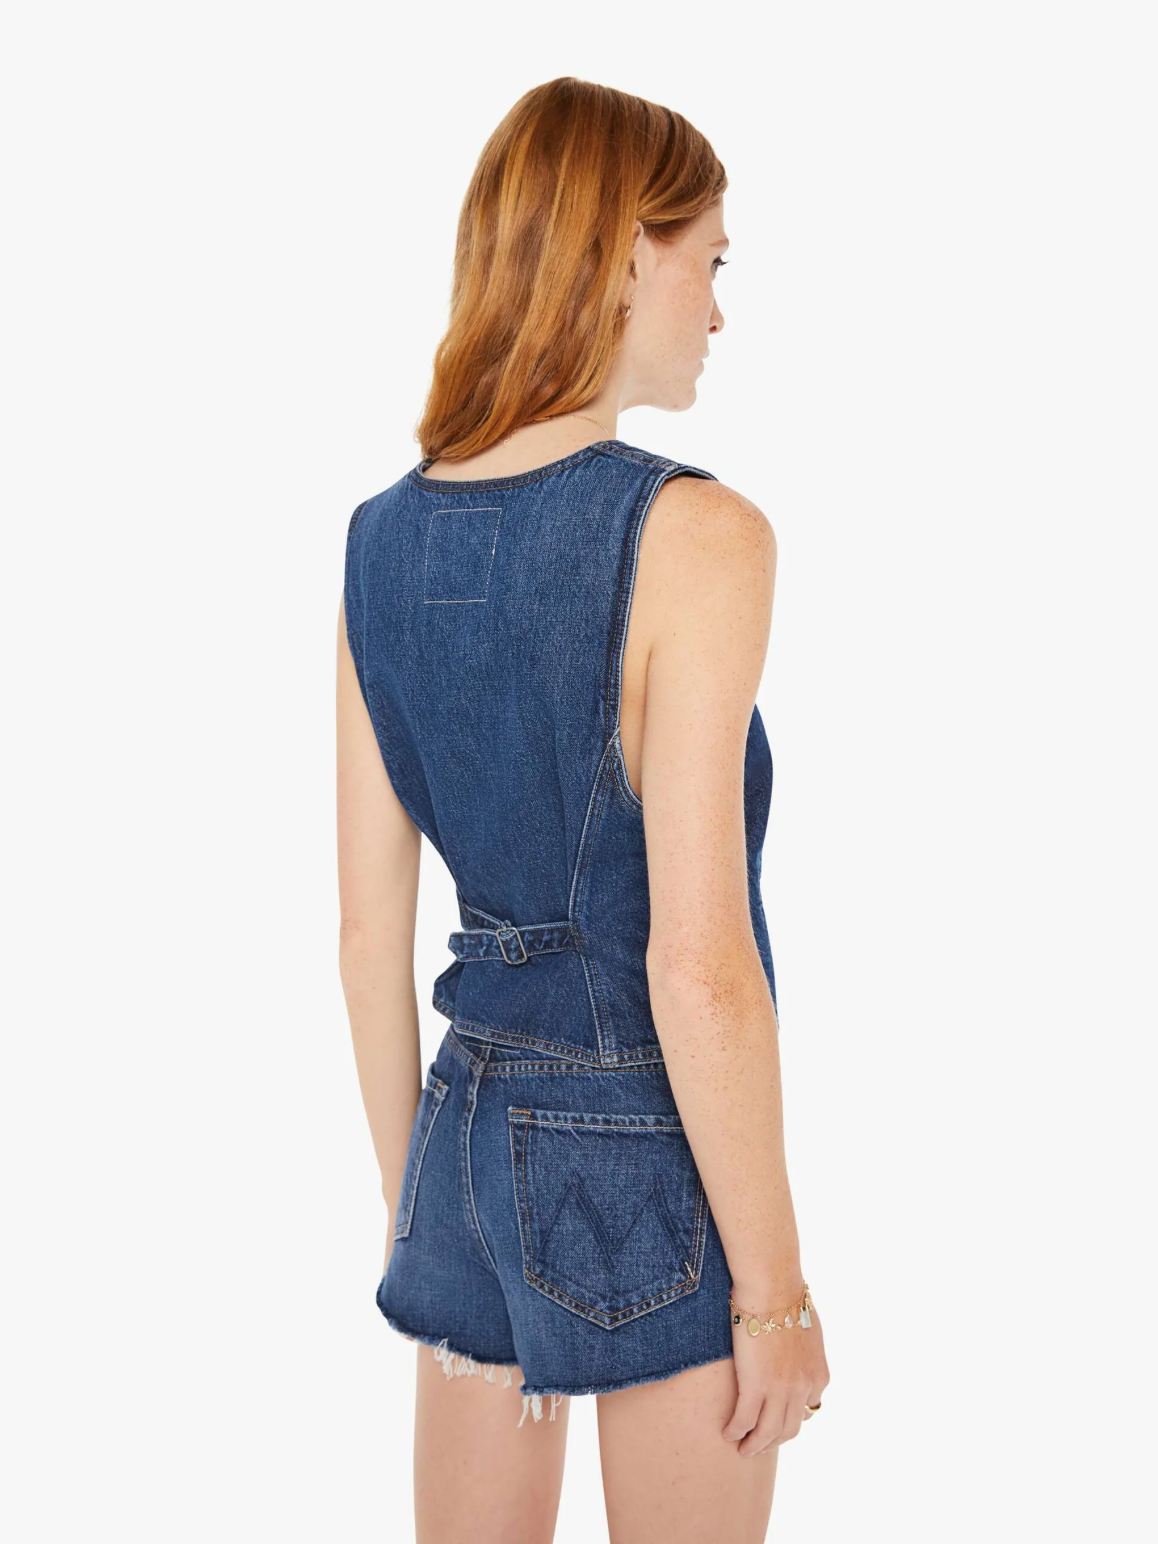 A woman with red hair wearing a sleeveless denim romper with a belted waist, viewed from the back. The outfit features a frayed hem and a patch pocket on the upper back, perfect for an Arizona style day by Mother&#39;s The Masked Rider.